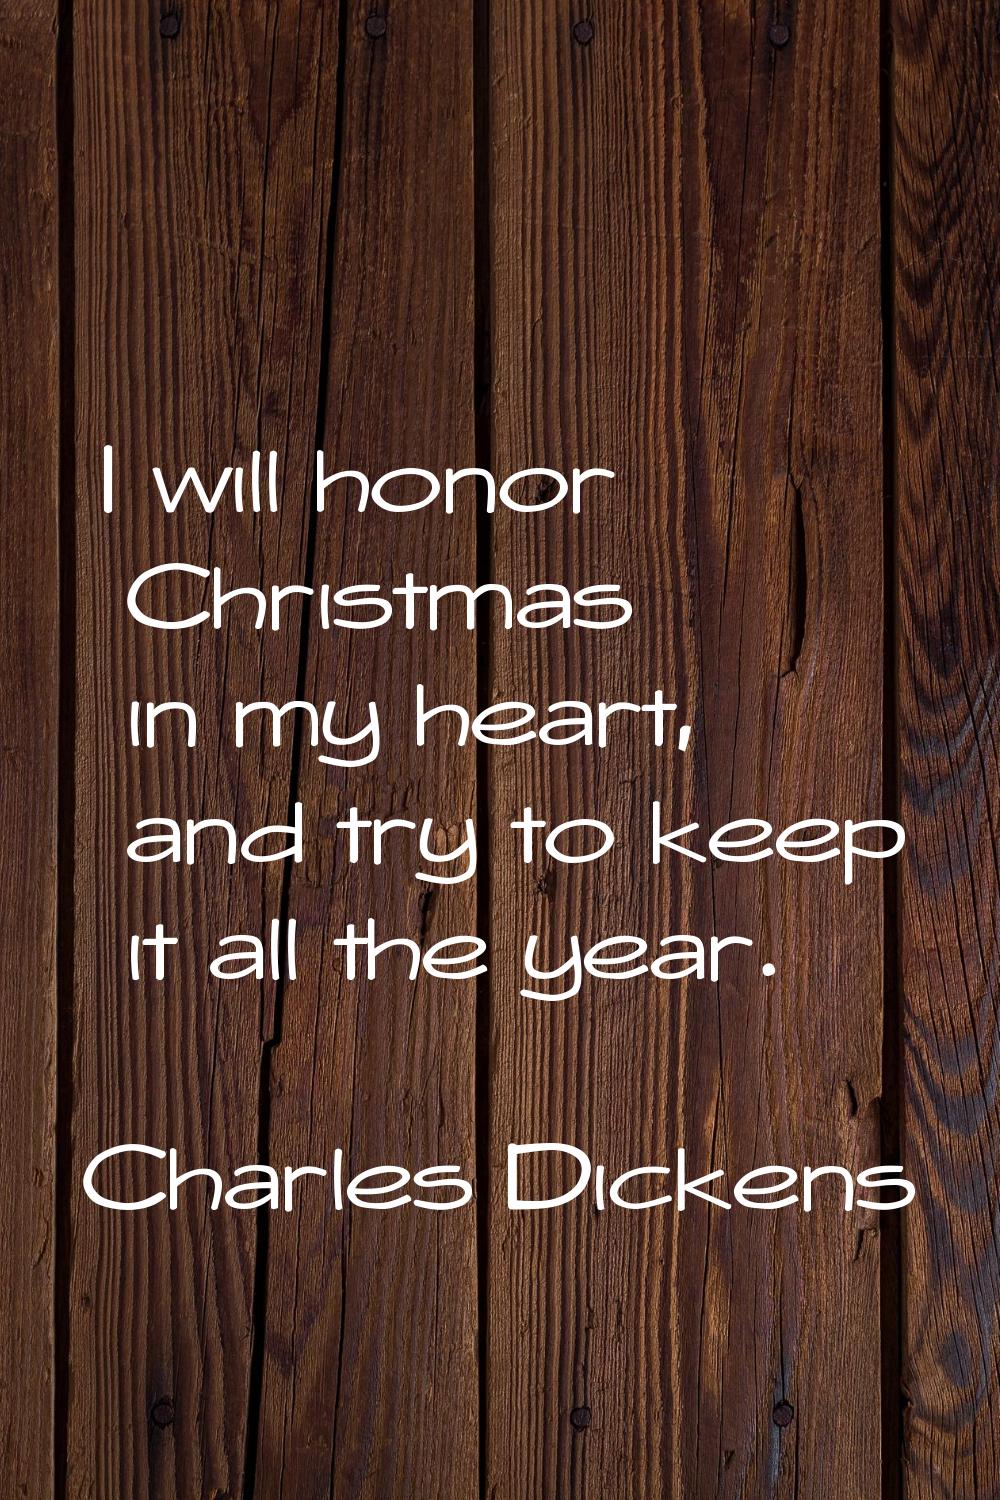 I will honor Christmas in my heart, and try to keep it all the year.